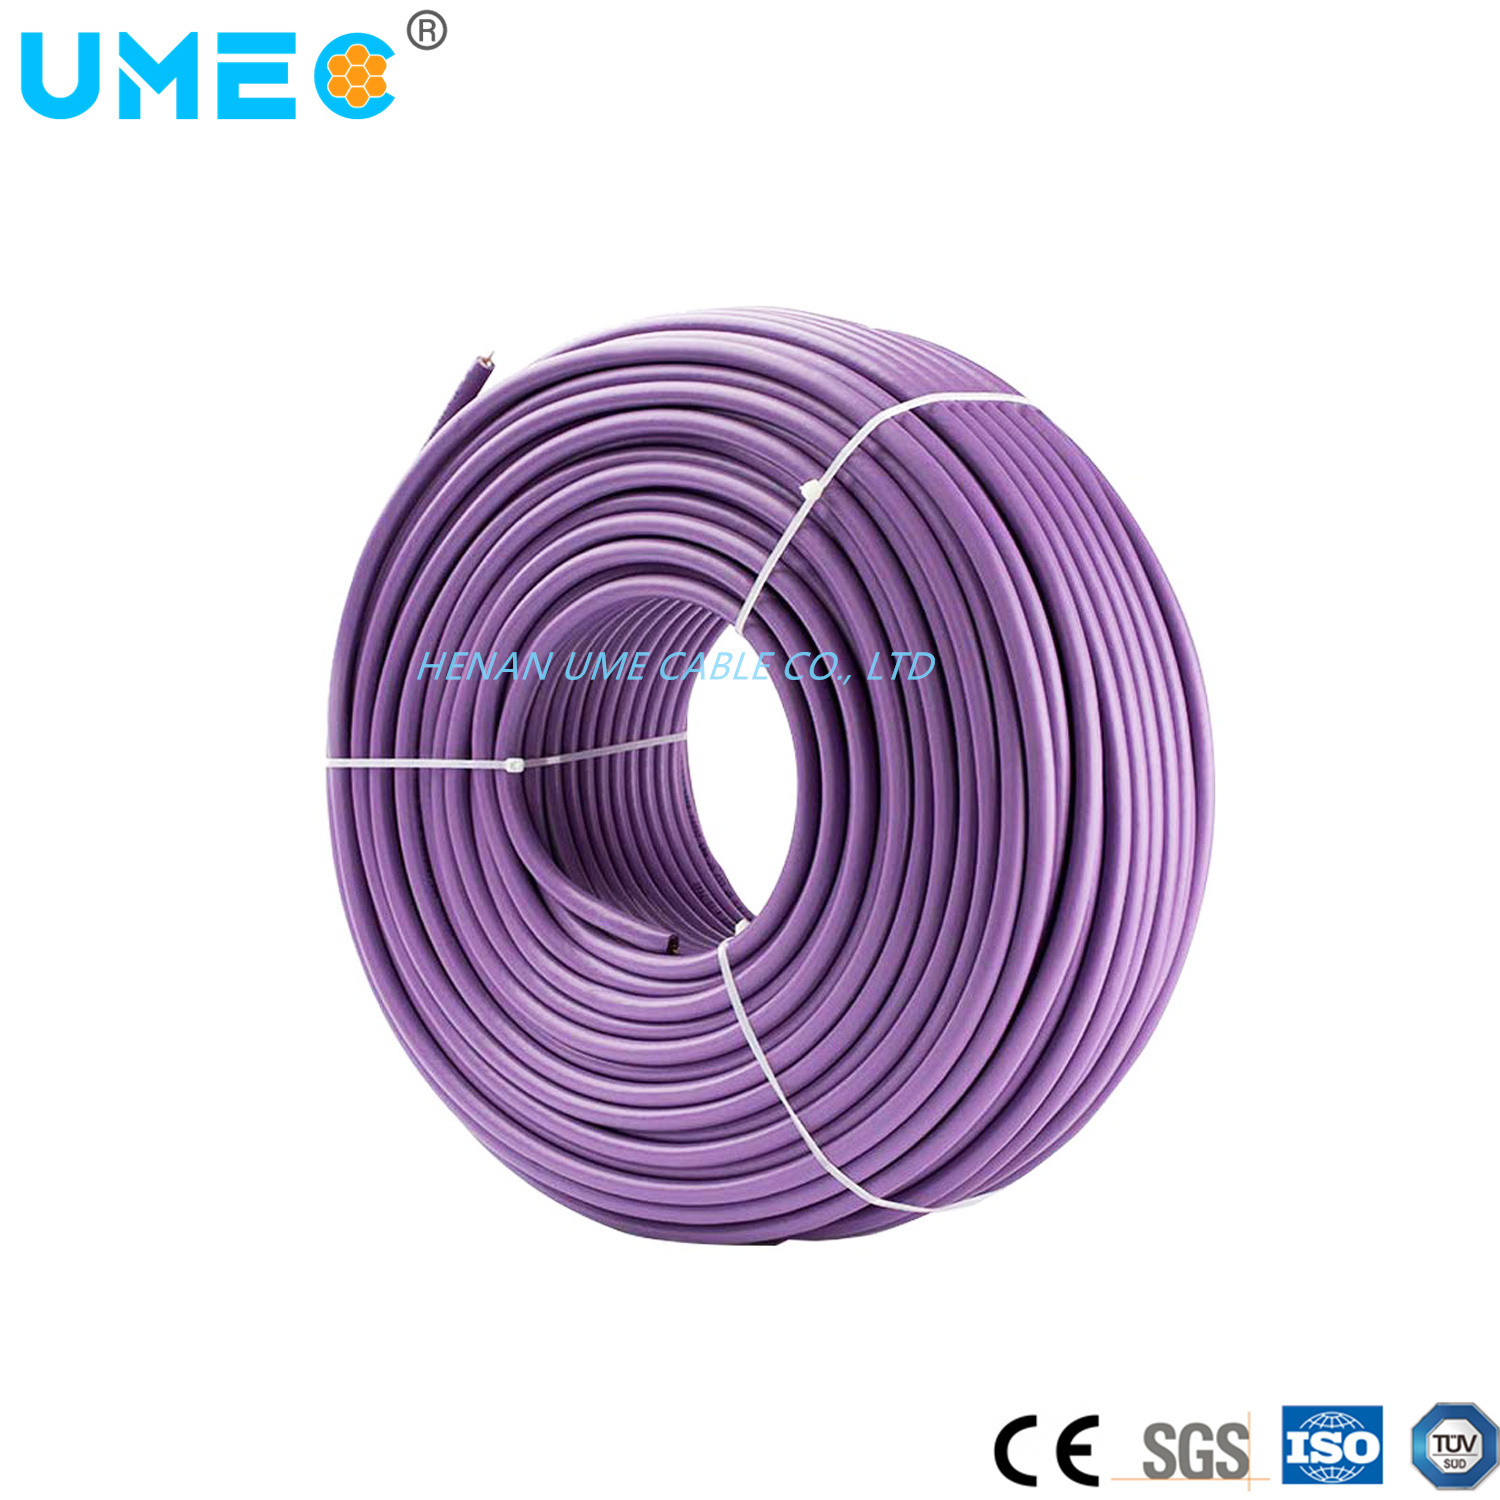 Siemens Network Connecting Cable 6xv1830-0eh10 Cable Communication Cable Electrical Building Cable